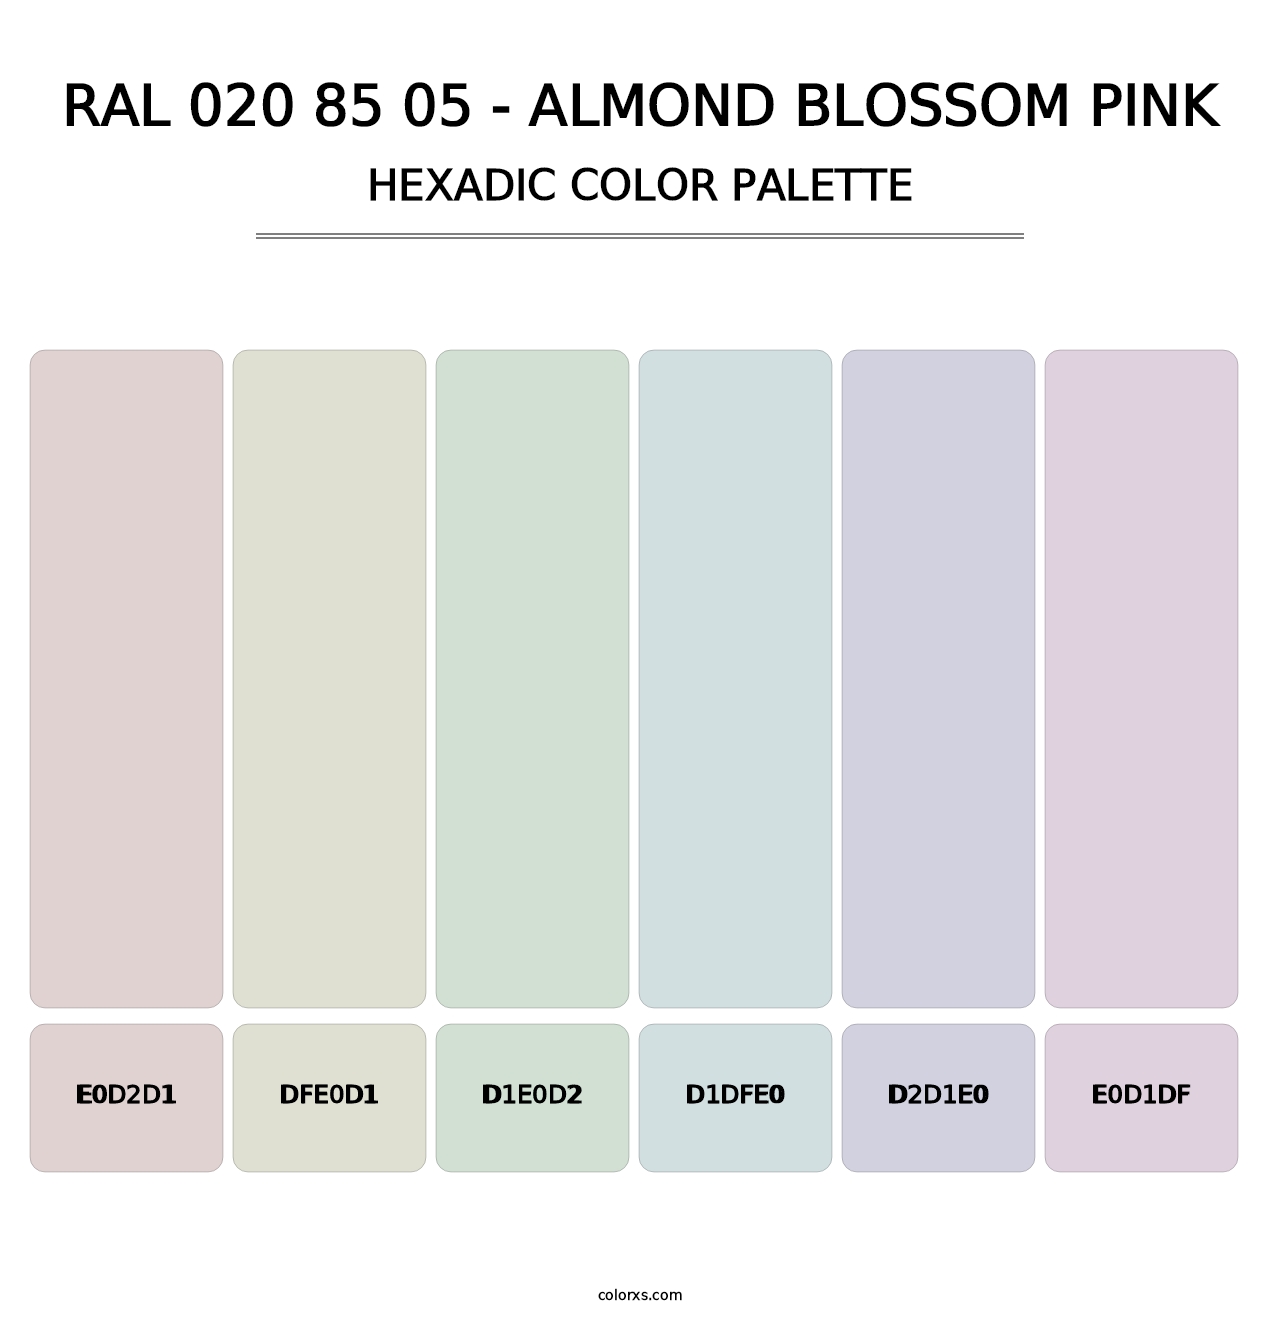 RAL 020 85 05 - Almond Blossom Pink - Hexadic Color Palette